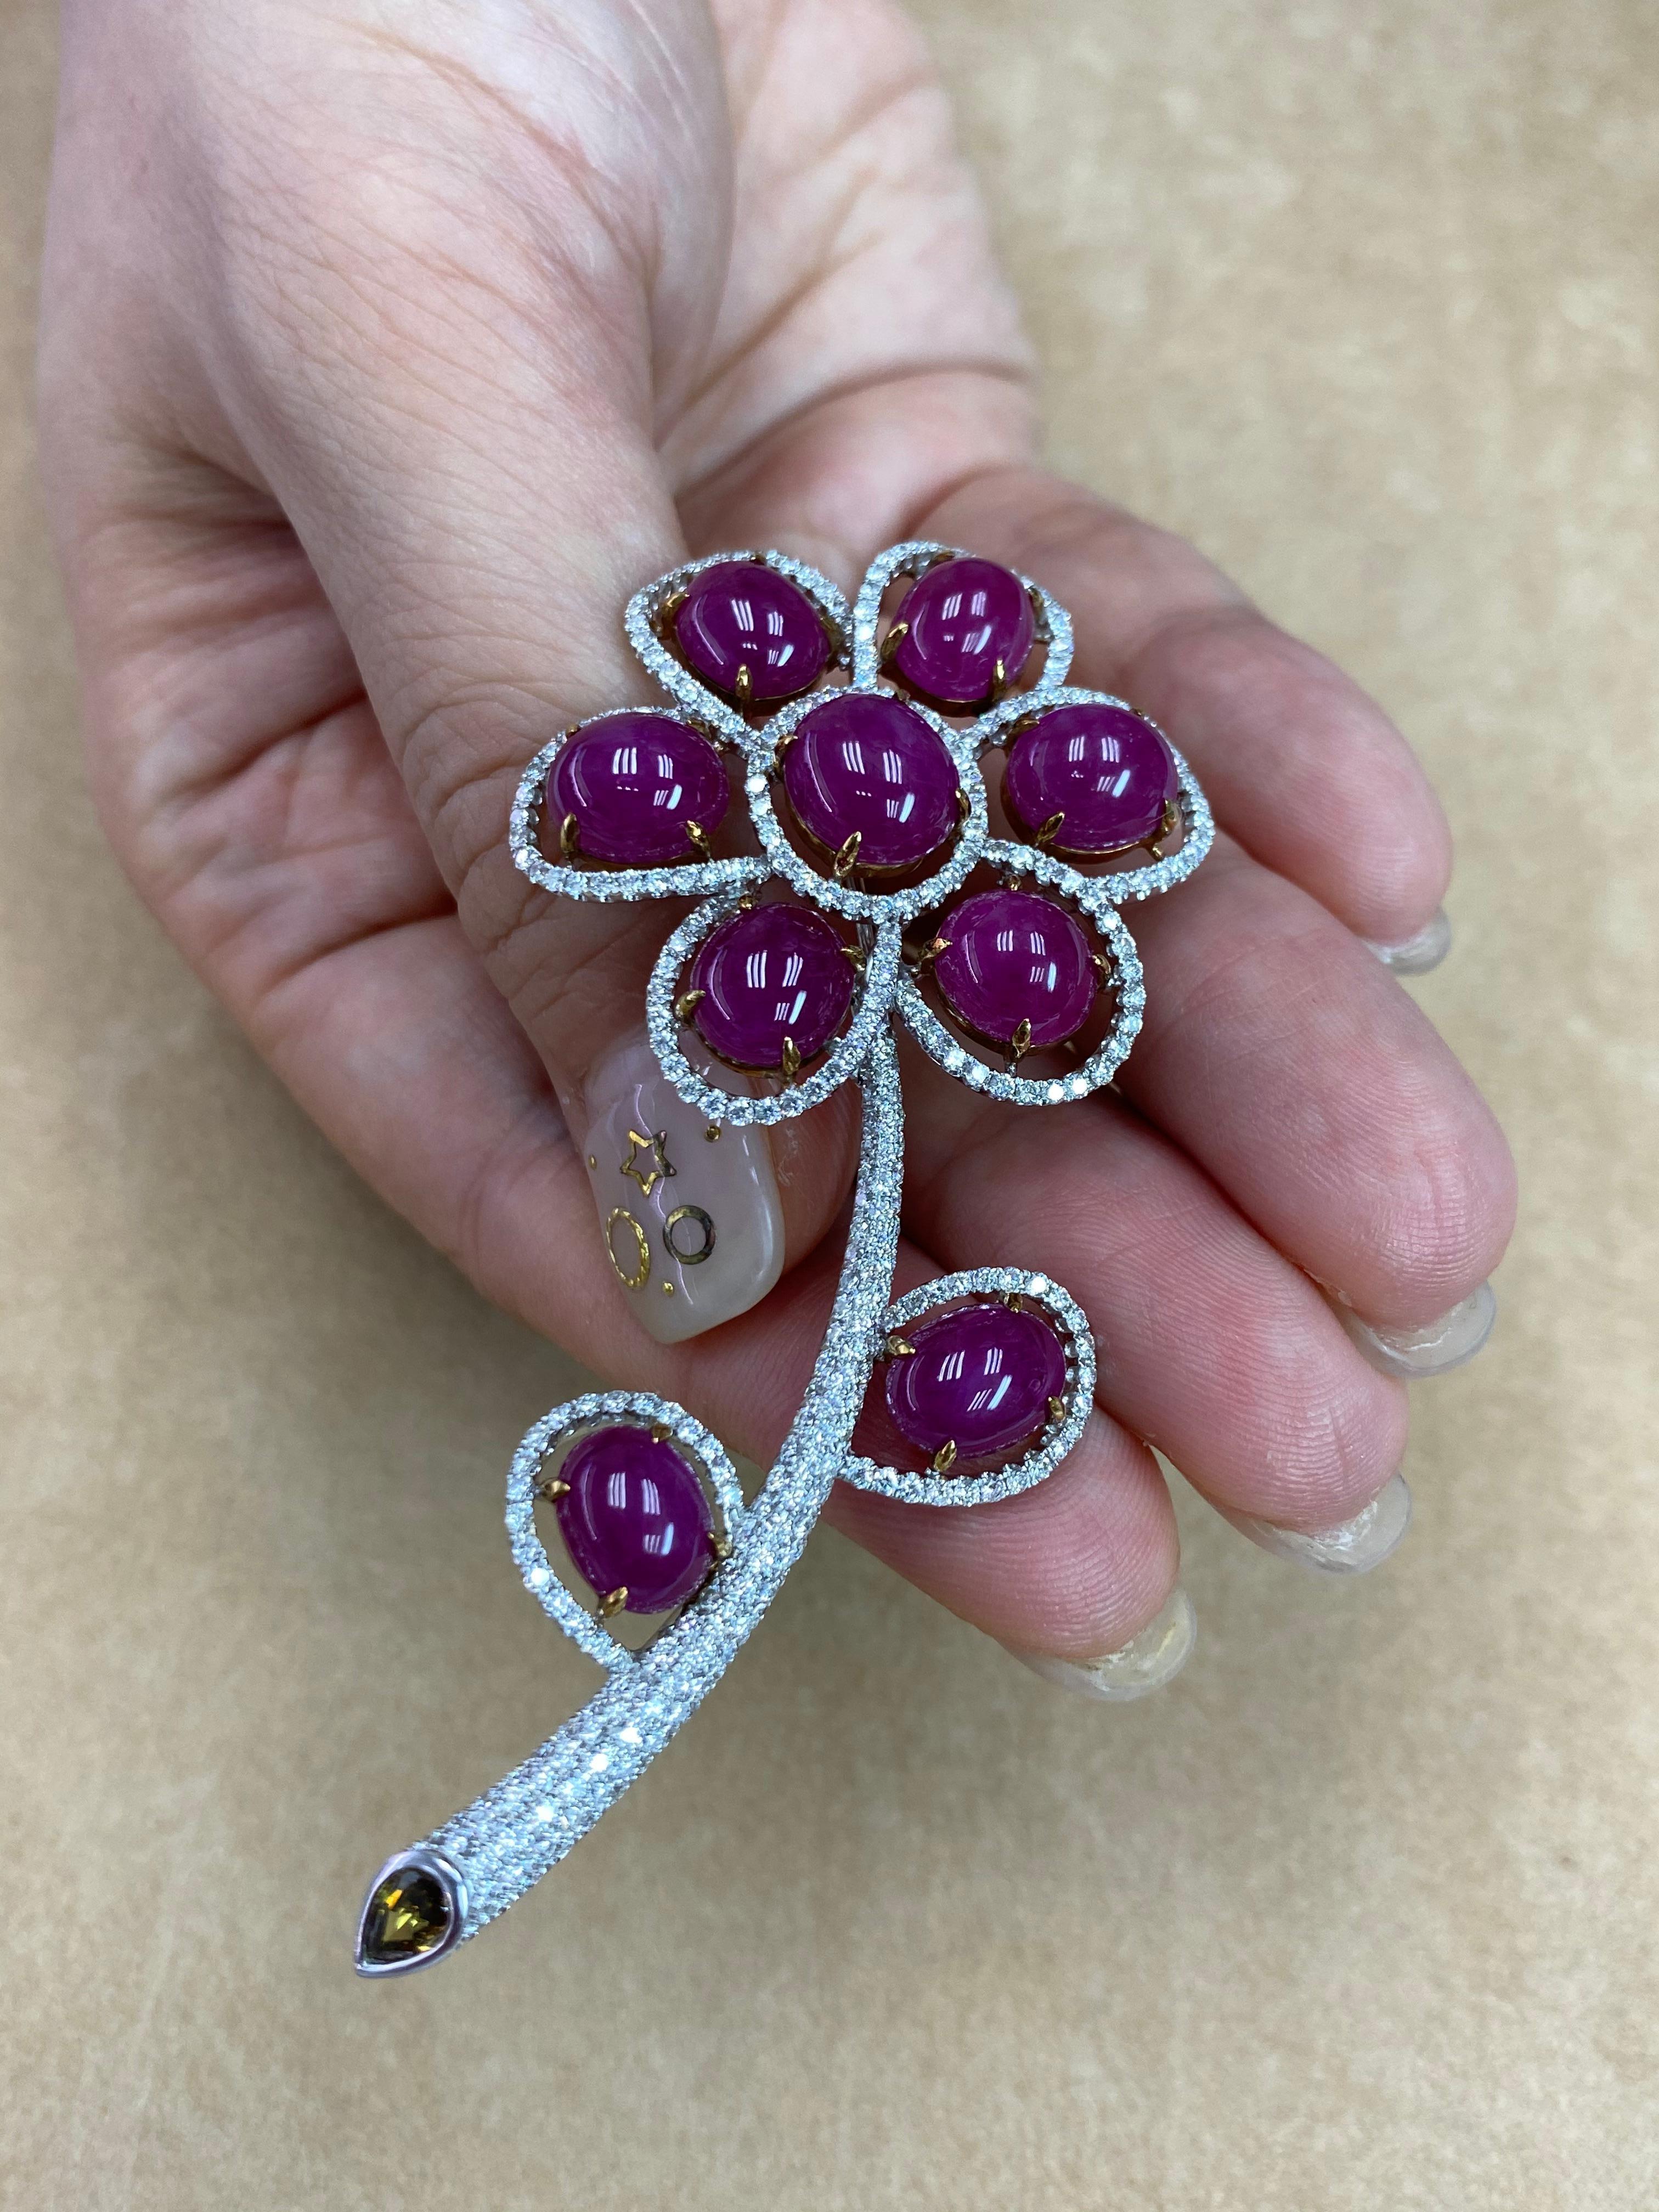 Here is a nice Ruby and diamond brooch. The brooch is set in 18k white gold, white diamonds and one fancy colored pear shaped diamond. . There are 9 Burma ruby cabochons totaling 26.48 Cts. There are 314 small diamonds totaling 2.47 cts in this